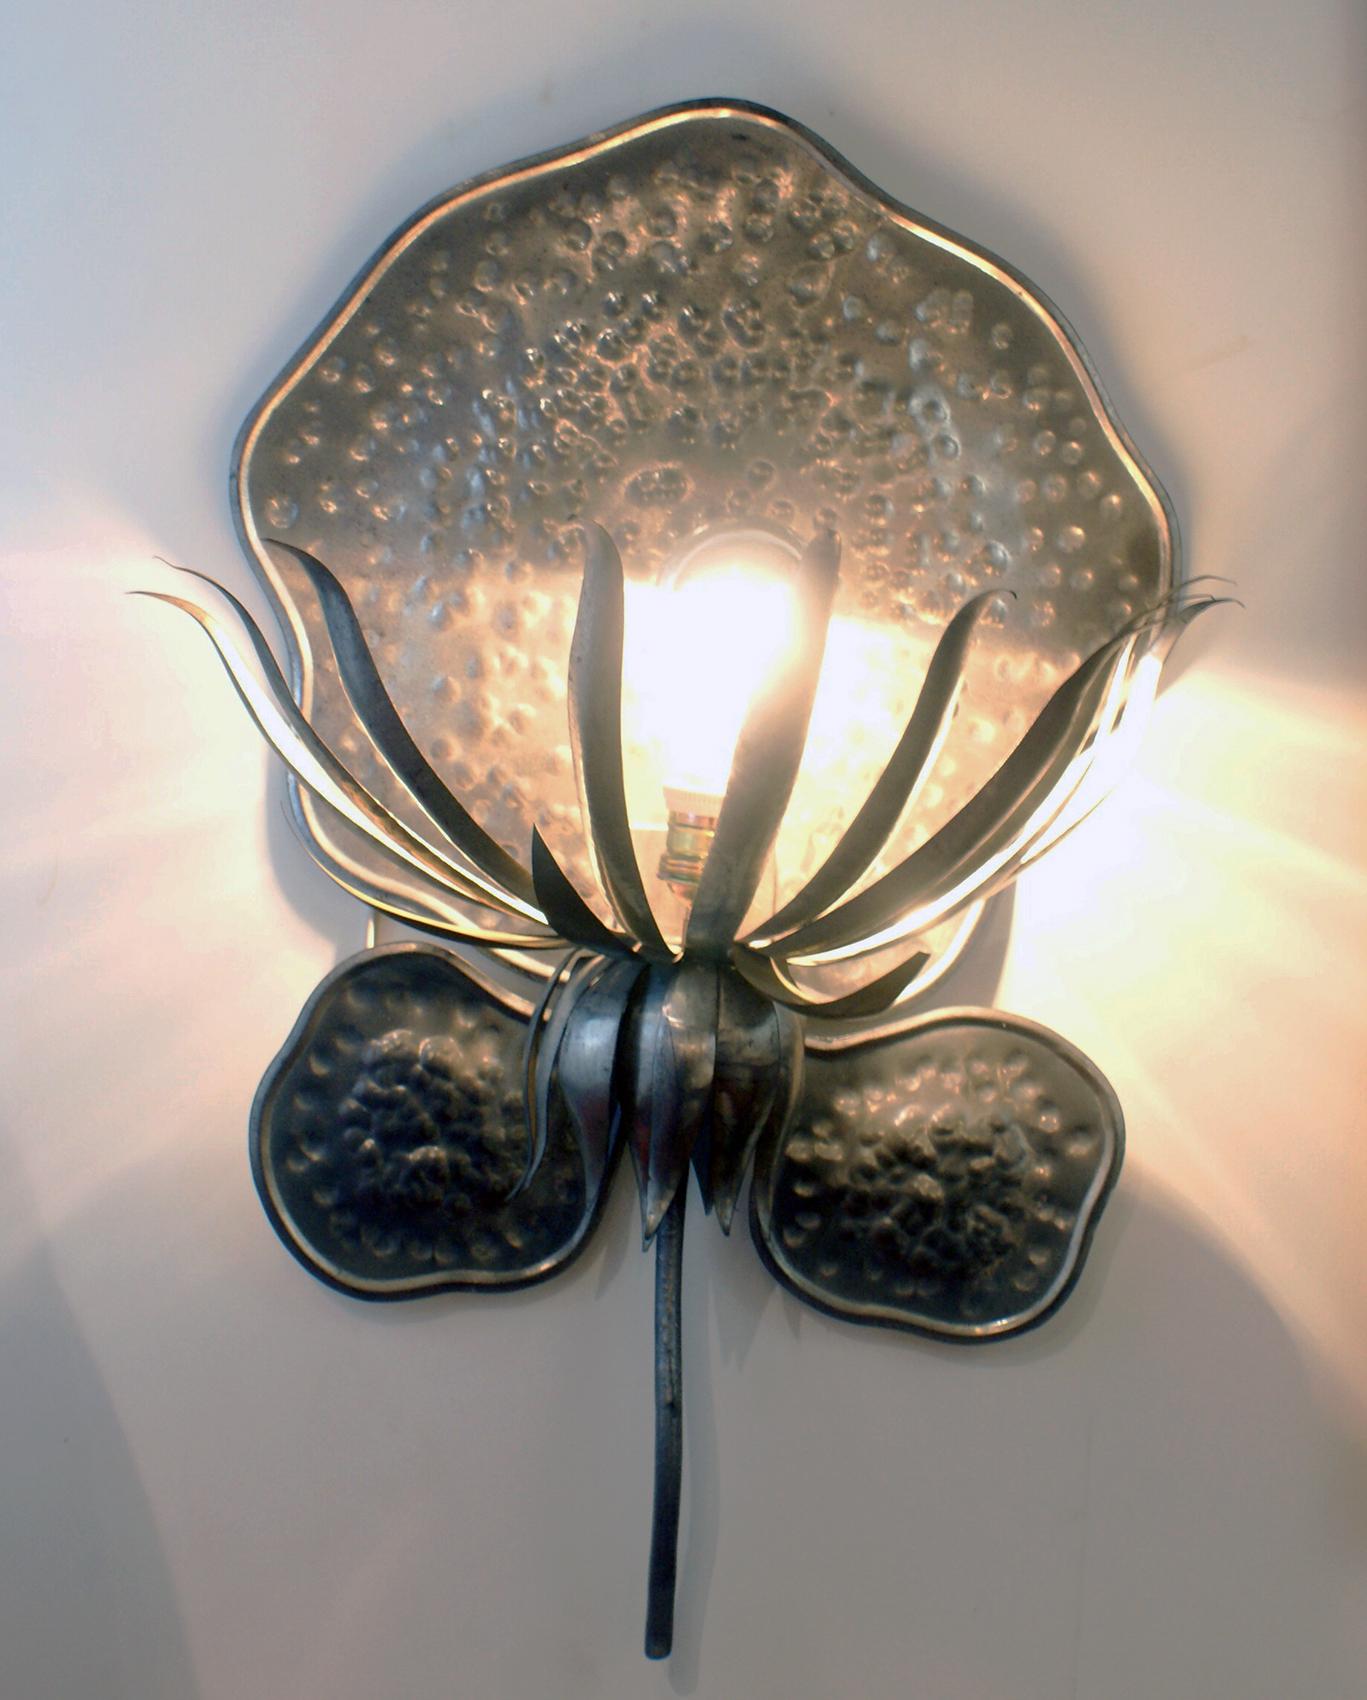 Unusual and decorative pair of modern design sconces, featuring hammered plaque (clover shape) and foliage in silver metal, matching to the sconce one light bulb, each with a 100 Watts max.
Can be delivered and wired for American or European